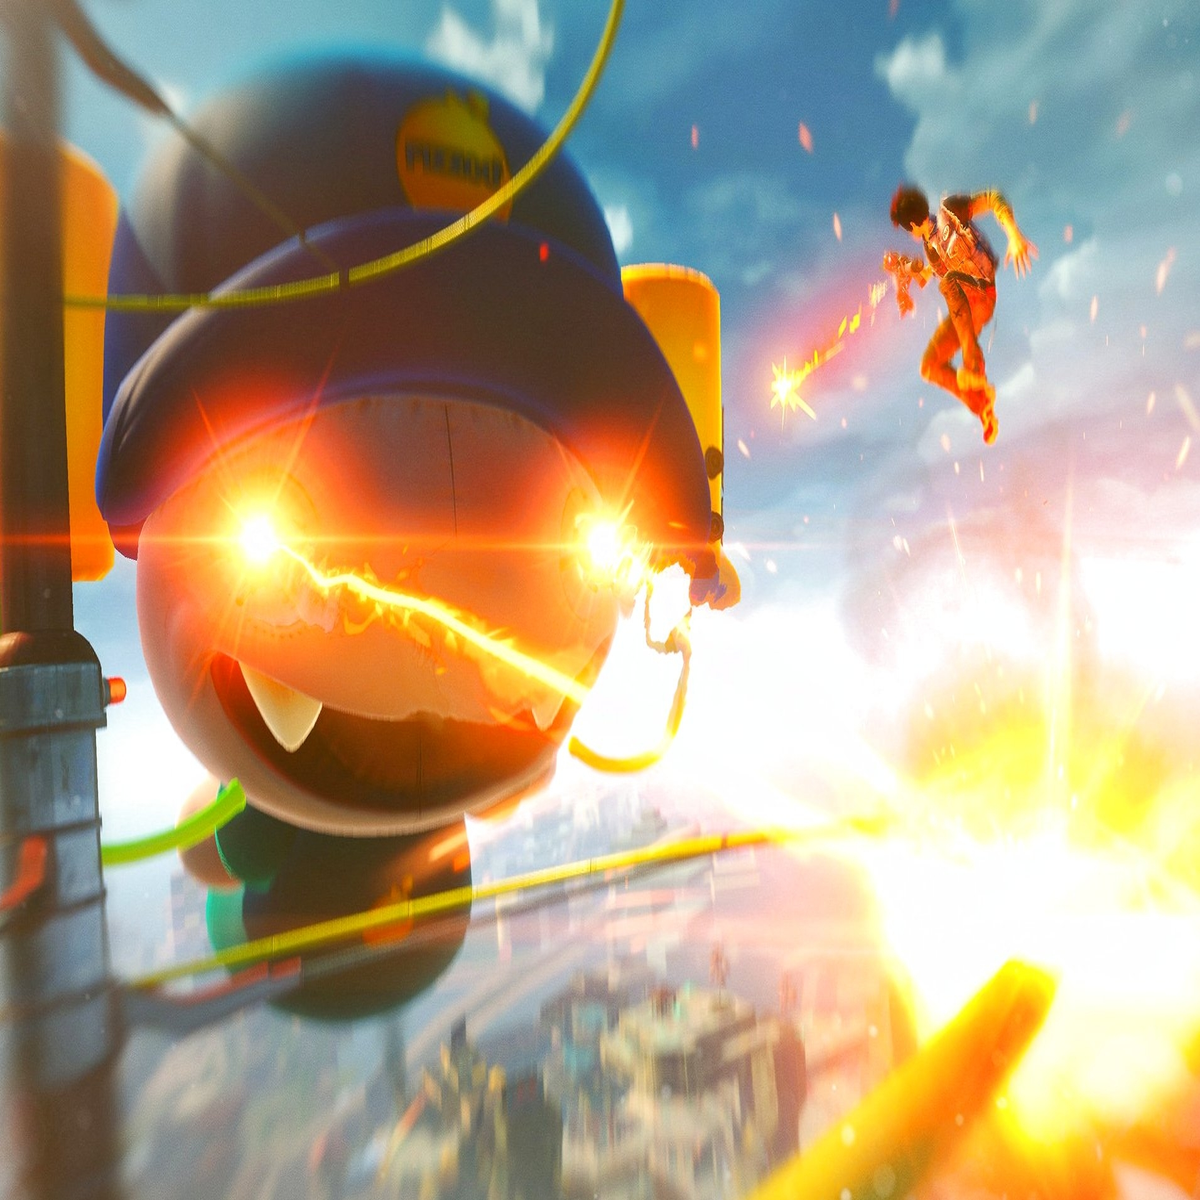 Crit Con: Sunset Overdrive brings the Xbox One a worthy exclusive